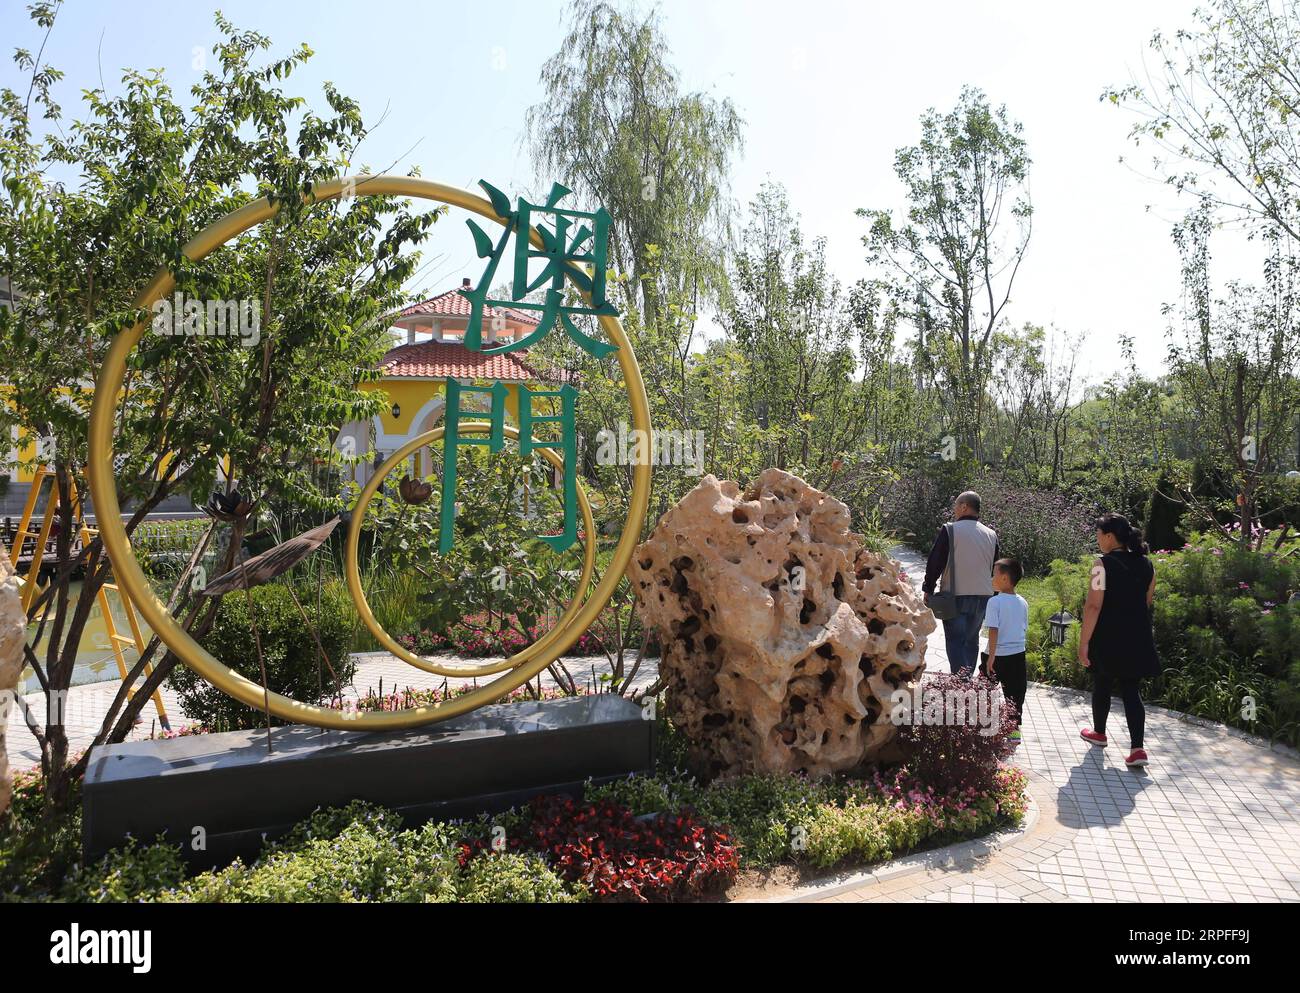 190923 --BEIJING, Sept. 23, 2019 -- Visitors tour the Macao Garden during the Macao Day event of the Beijing International Horticultural Exhibition in Beijing, capital of China, Sept. 22, 2019. Macao Special Administrative Region of the People s Republic of China is on the southwestern side of the Pearl River Delta. Although it is a densely populated region, with a population of about 670,000 and an area of some 33 km, Macao has been putting efforts on ecological protection. Macao has over 20 urban parks or gardens, four rural parks and three wetland ecological zones. Its unique geographical l Stock Photo